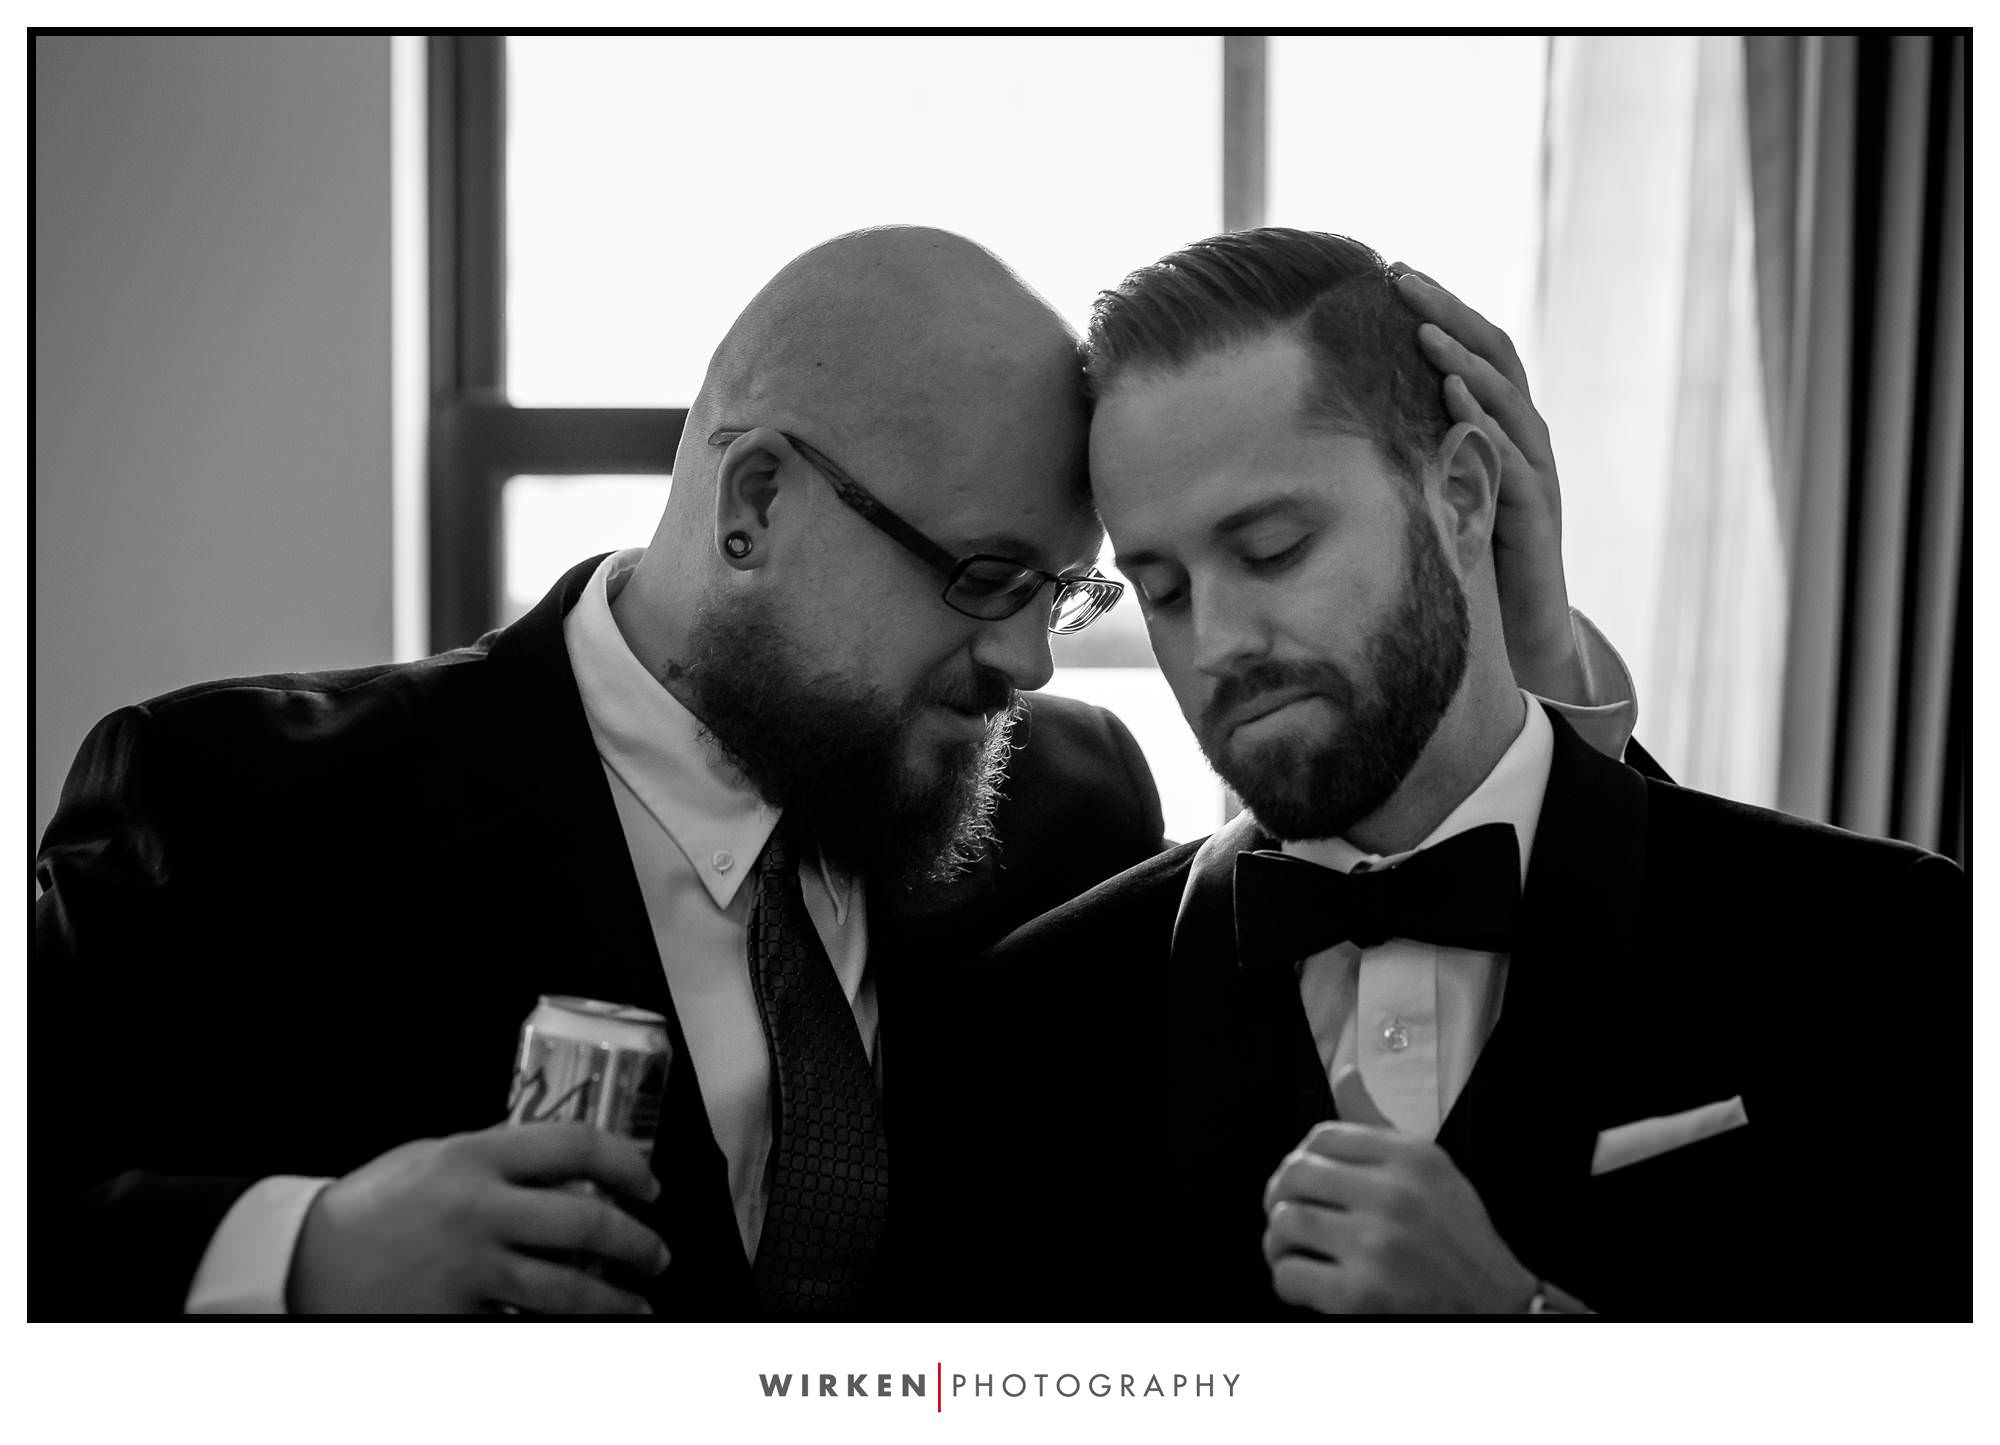 Ryan shares a quiet moment before his Kansas City wedding